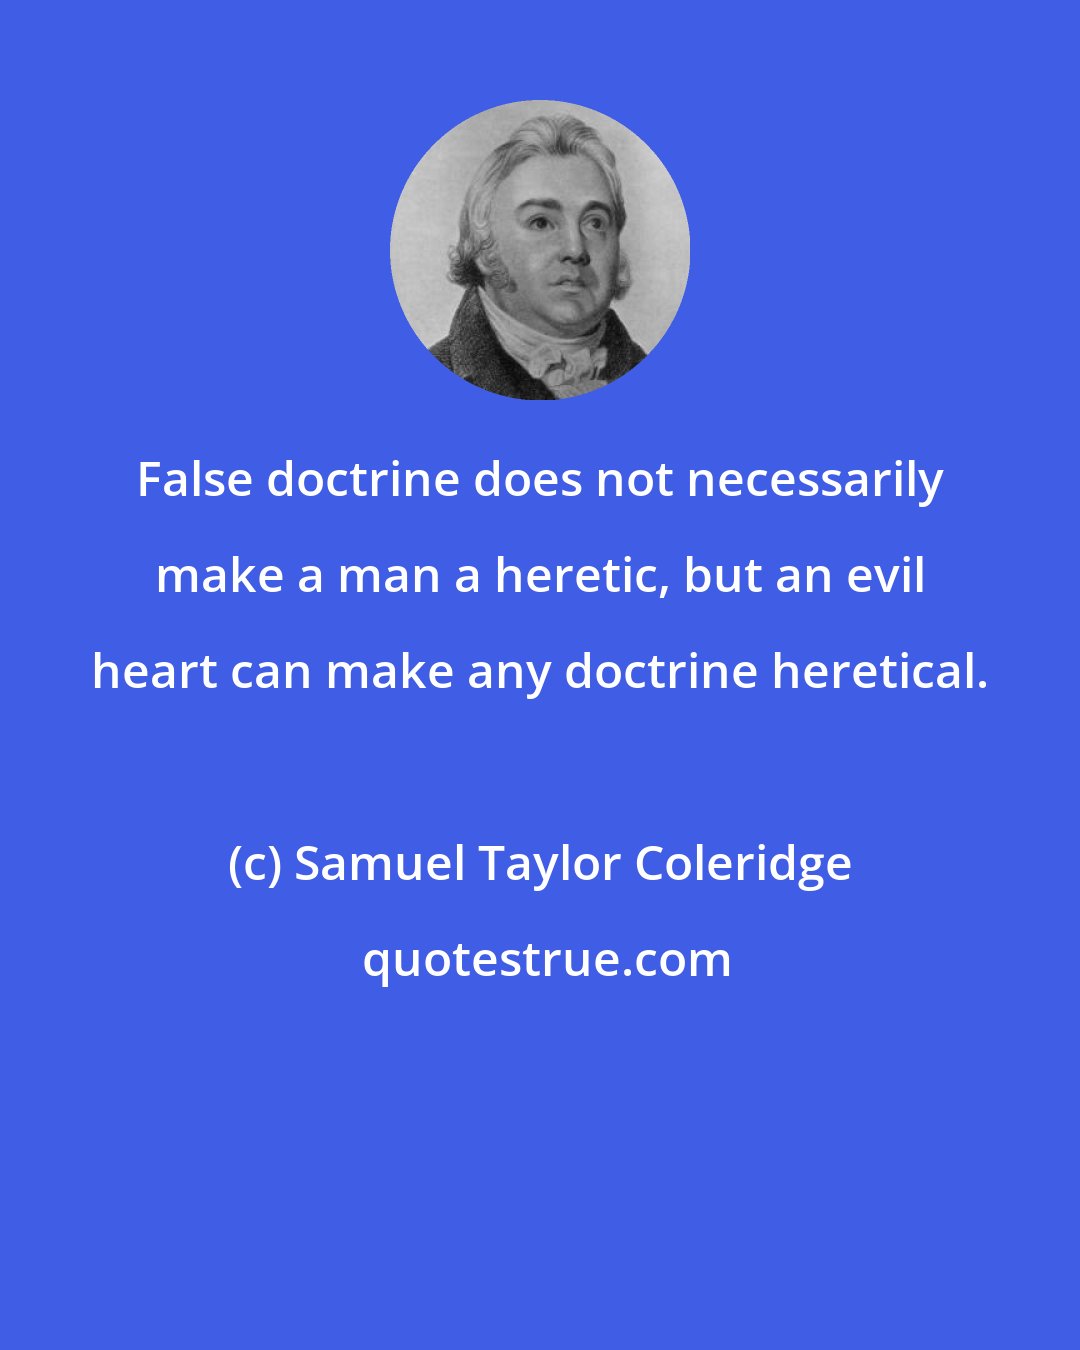 Samuel Taylor Coleridge: False doctrine does not necessarily make a man a heretic, but an evil heart can make any doctrine heretical.